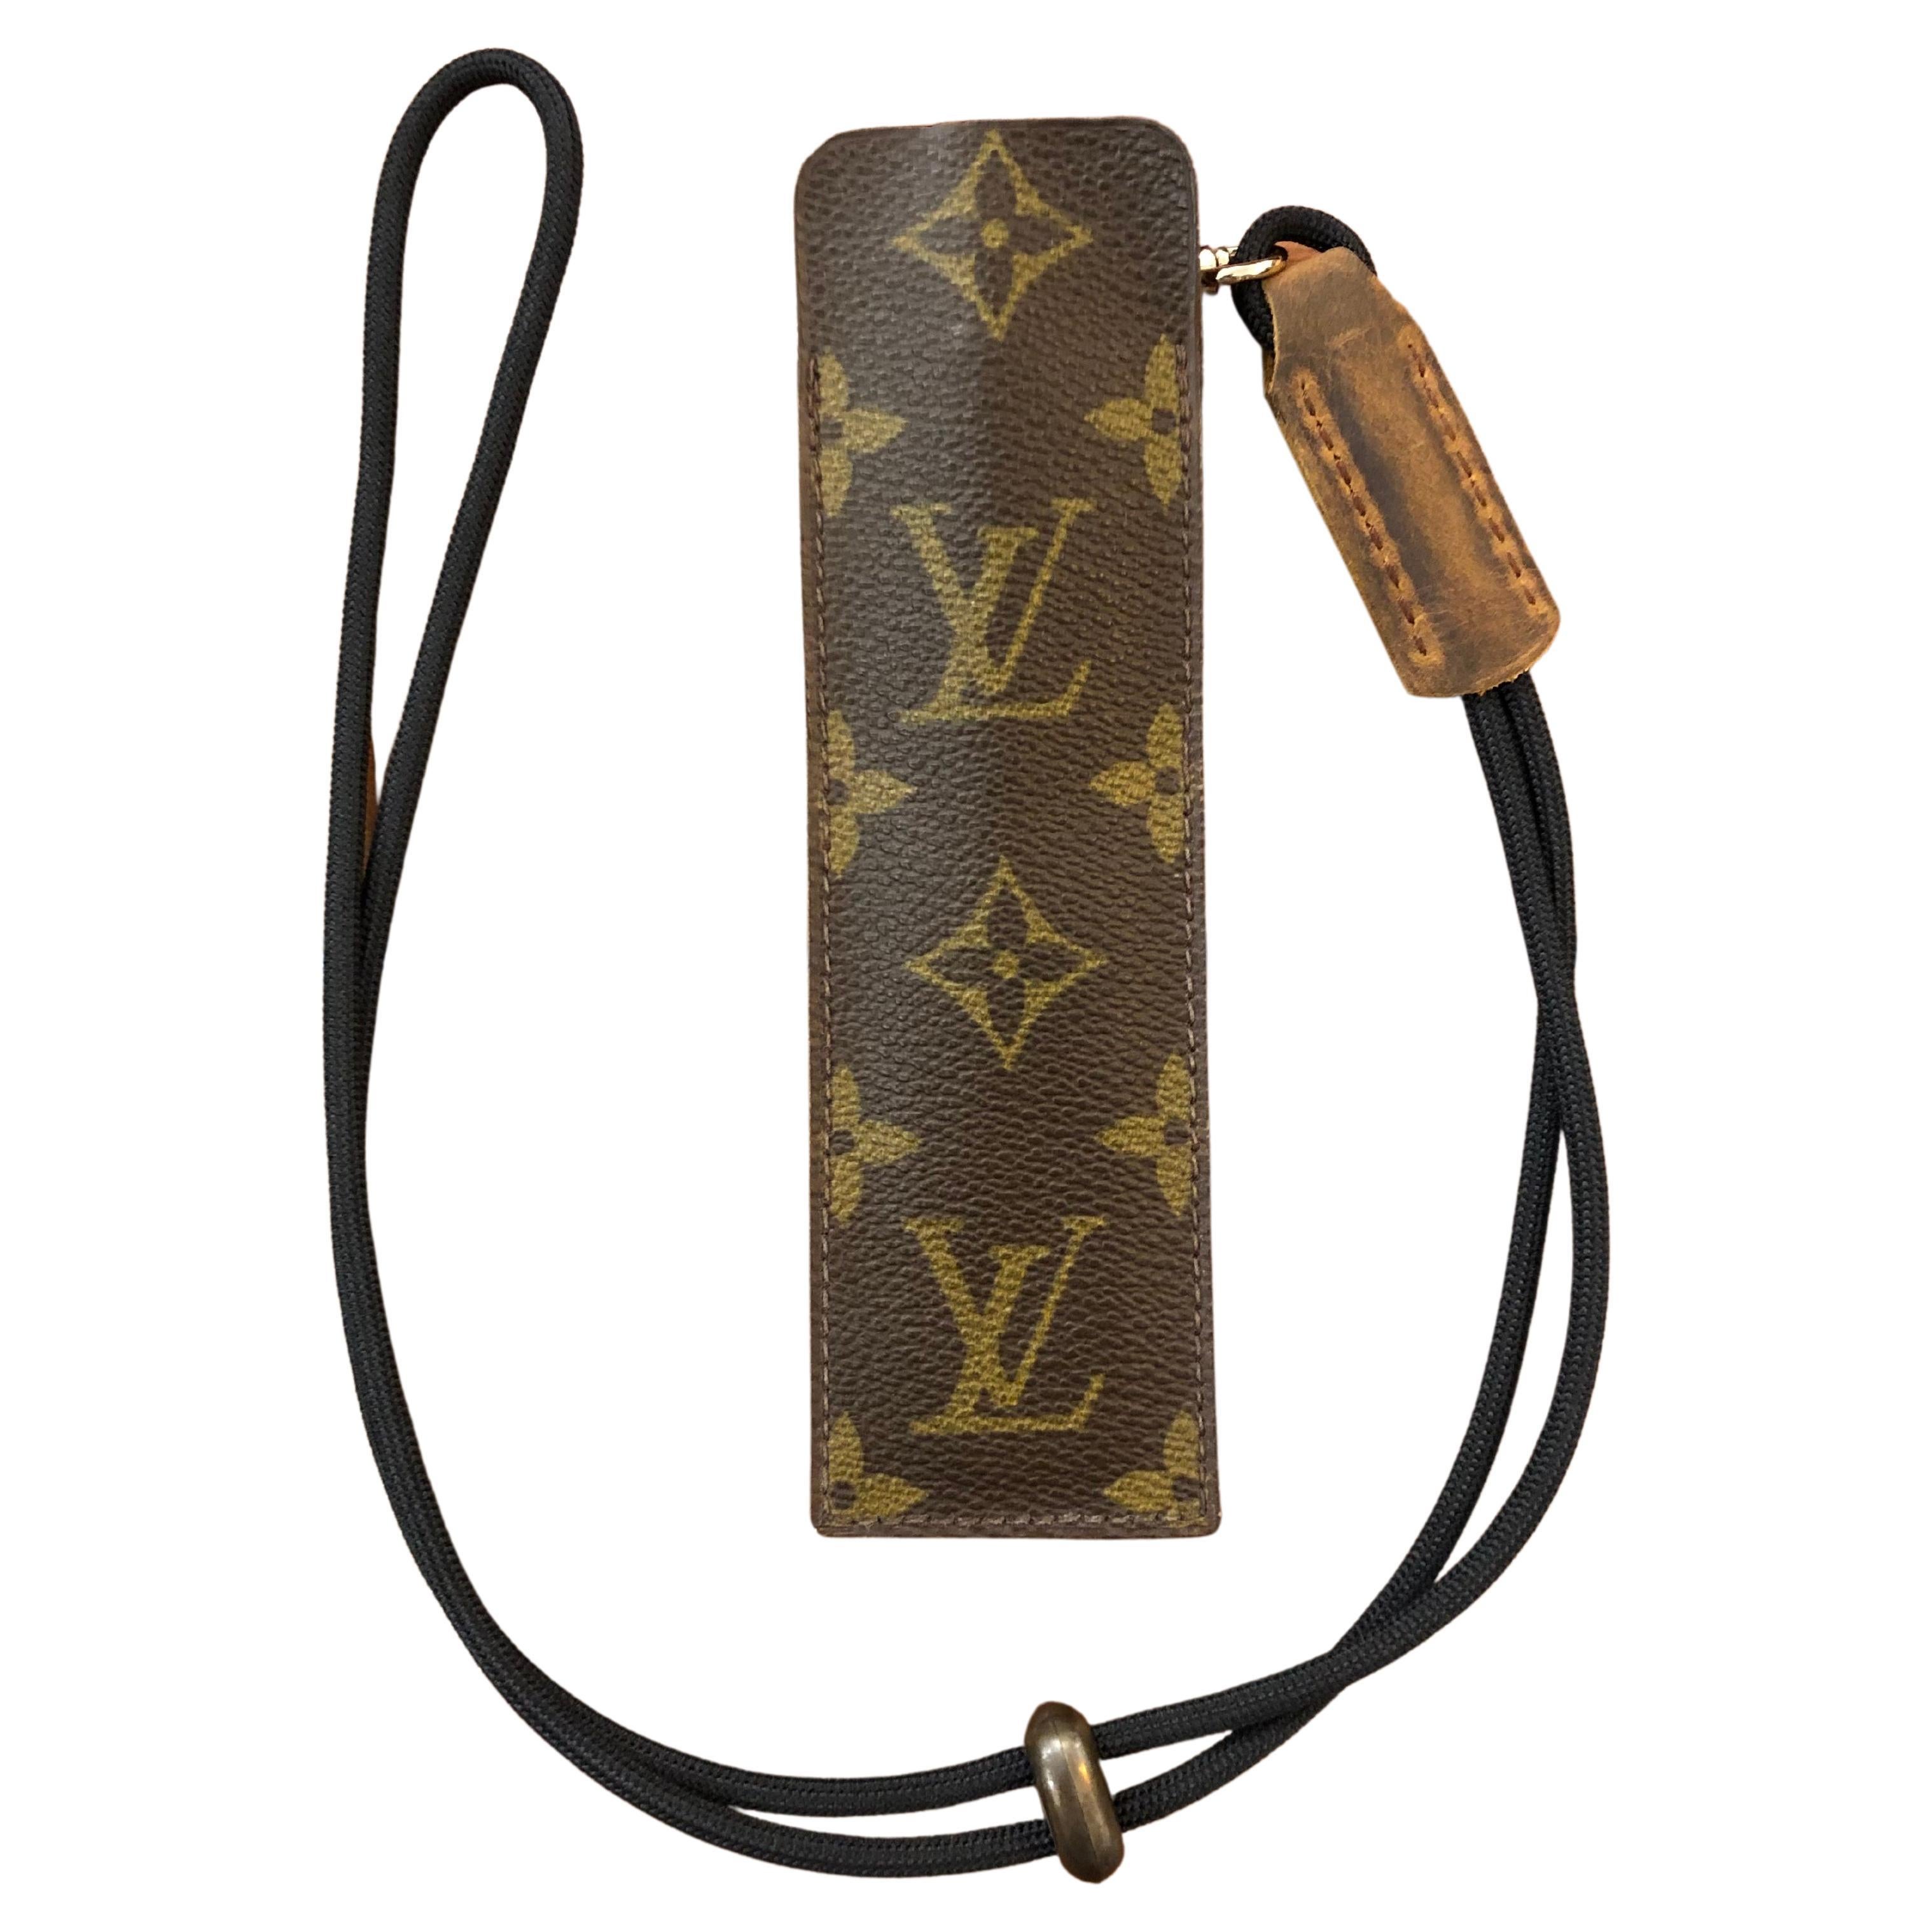 This vintage LOUIS VUITTON Etui Comb Case is crafted of LOUIS VUITTON monogram canvas lined with brown smooth leather. This LOUIS VUITTON was manufactured prior to 1982 and no date code was used. Measures approximately 6.1 x 1.75 inches. 

This